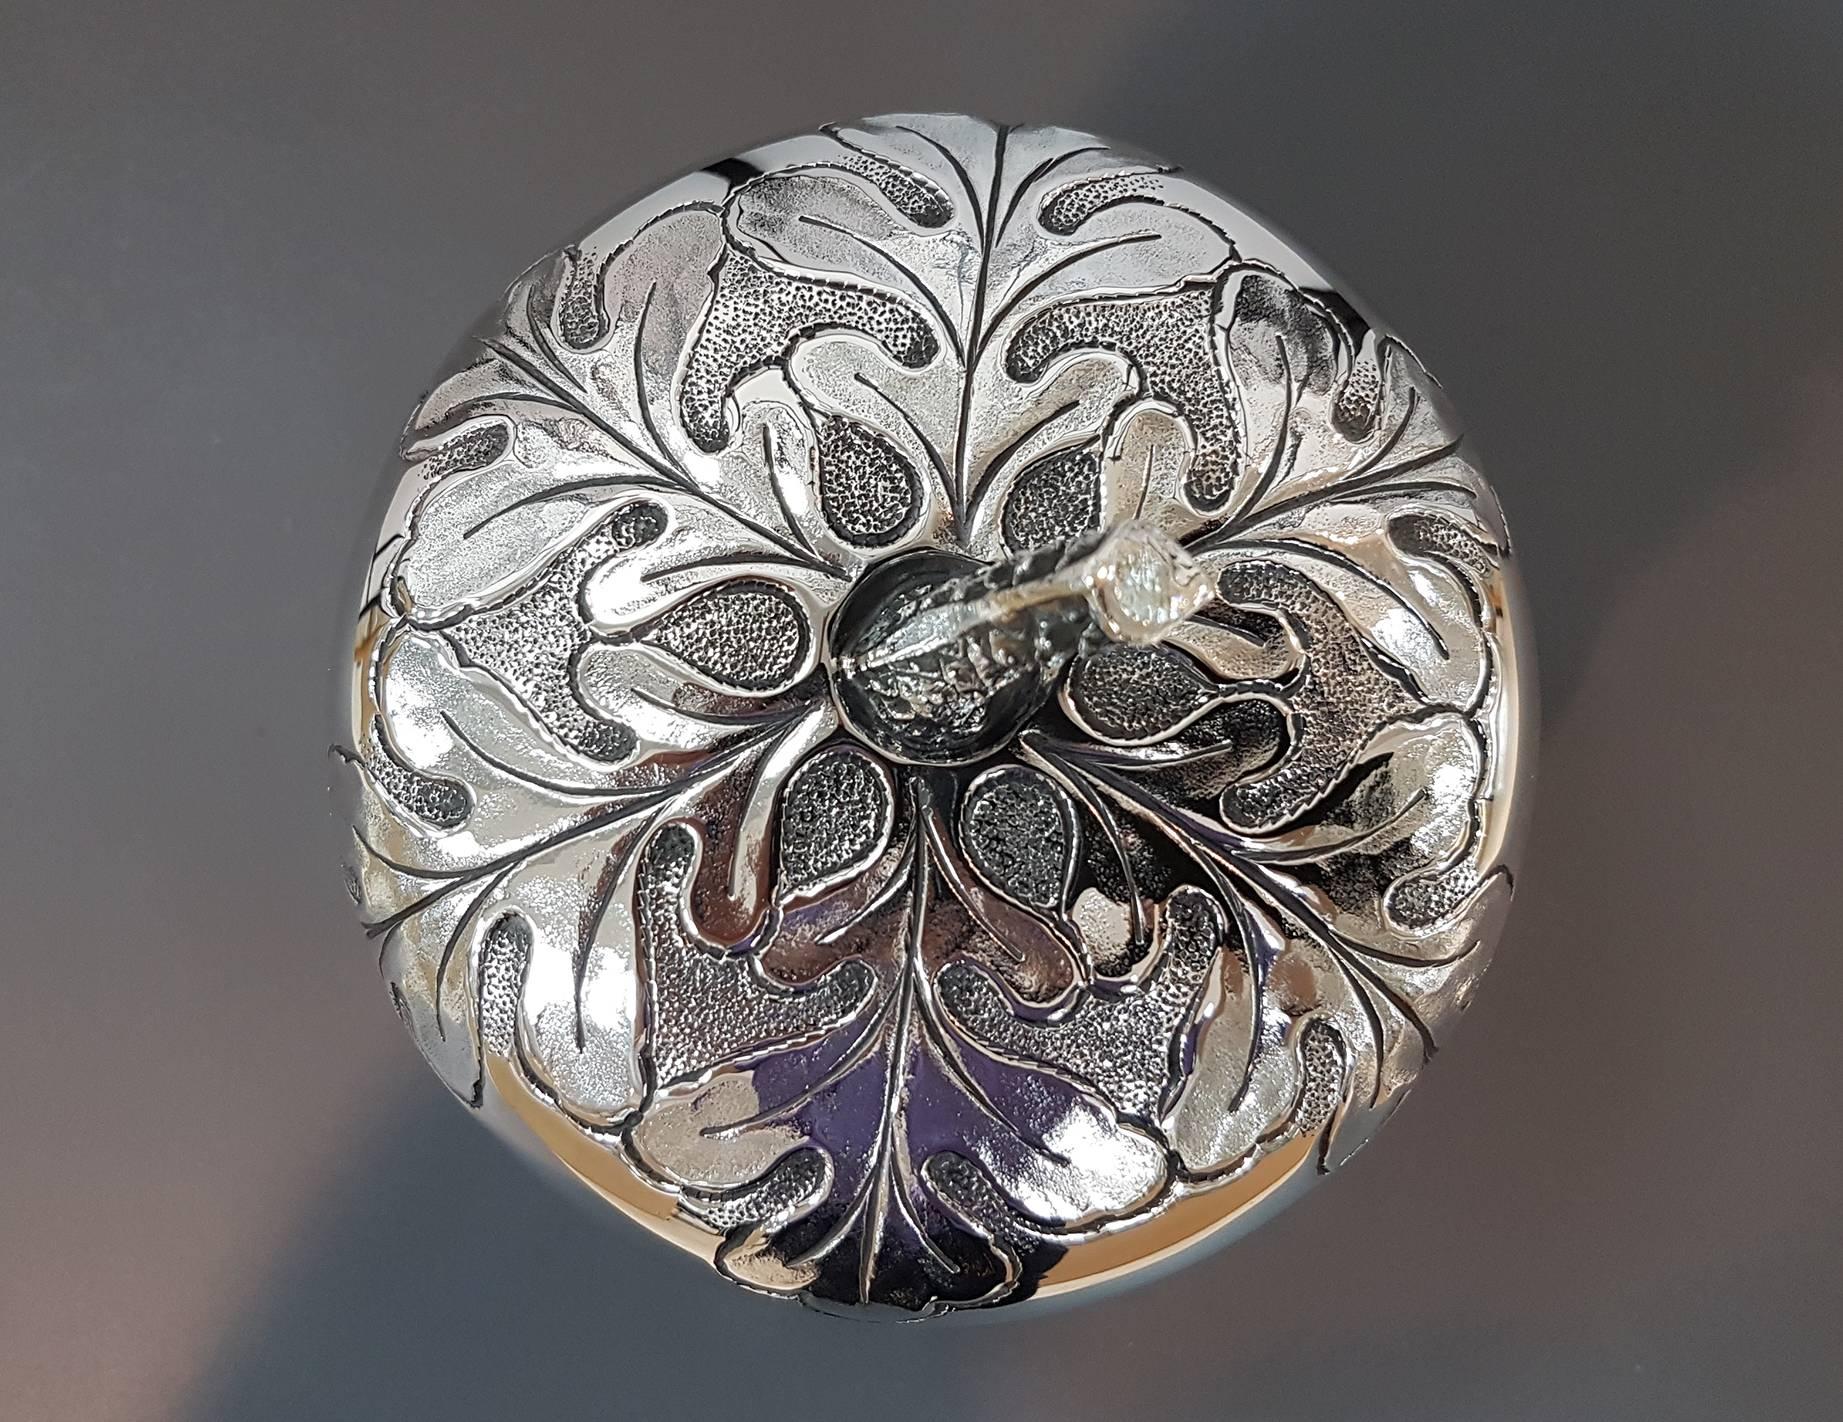 Decorative acorn-shaped 800 solid silver box.
The body of the box is round and has been embossed and chiseled with the typical grain of the acorn.
The lid, larger than the body, perfectly follows the domed shape of the oak fruit.
The knob is cast